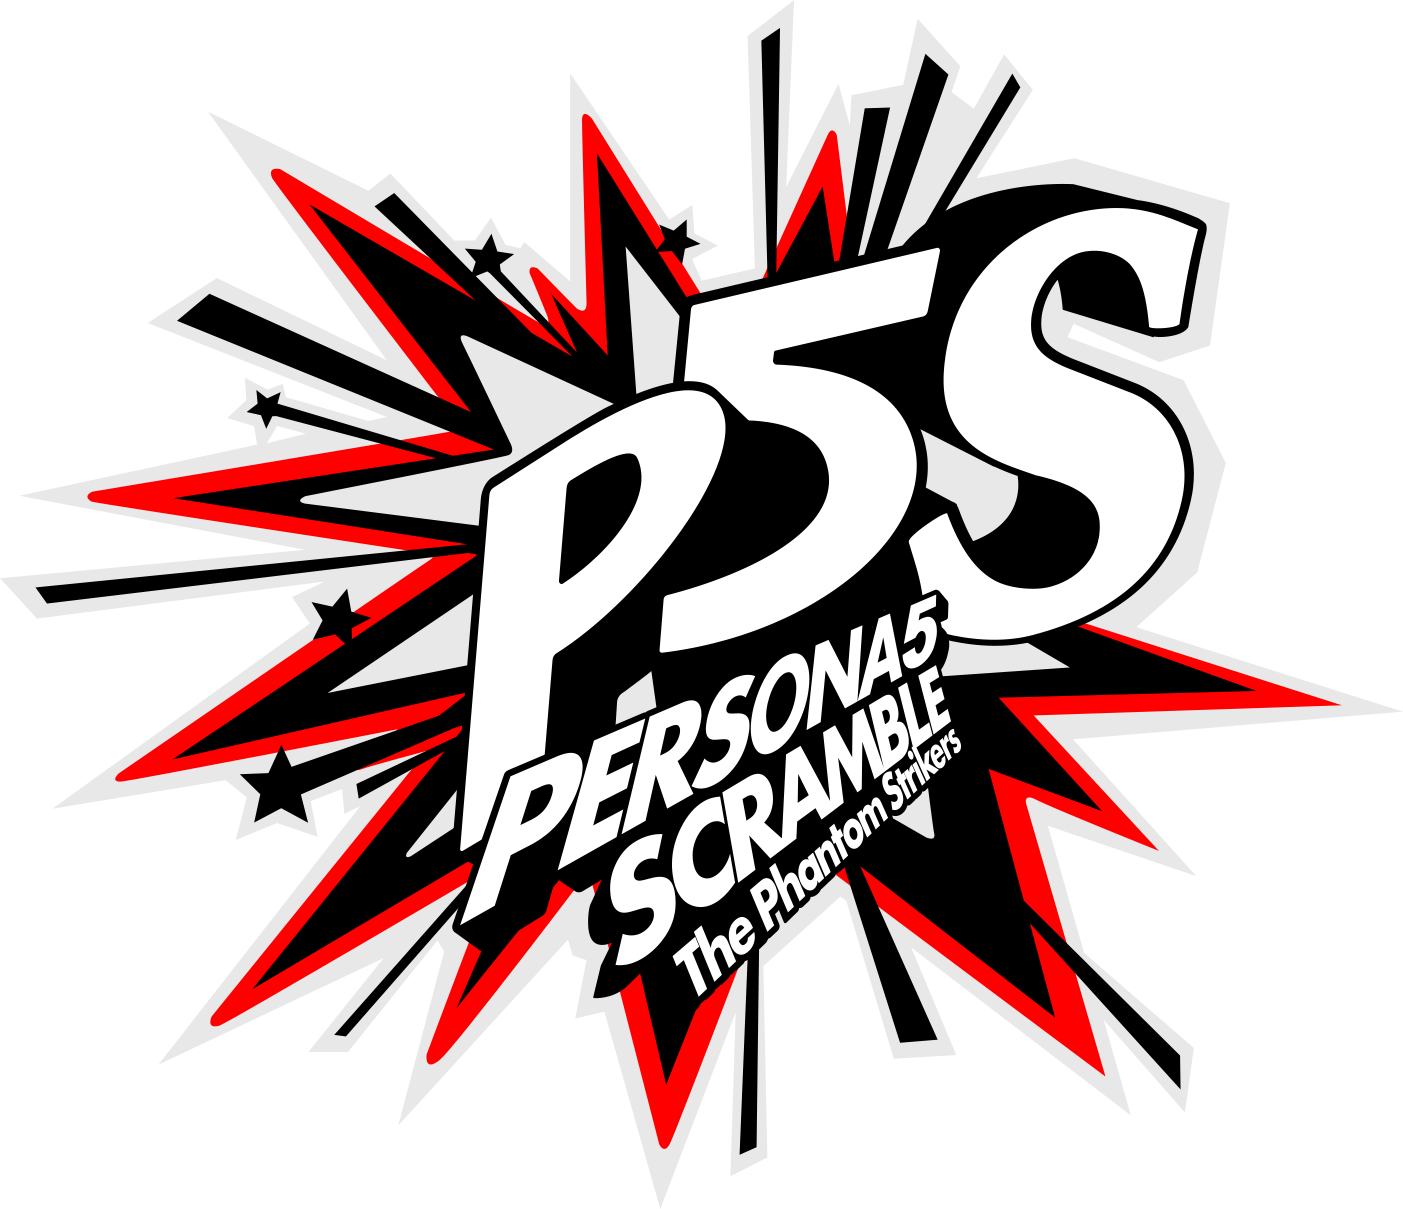 Persona 5 Strikers Review - A Game After My Own Heart [Spoiler